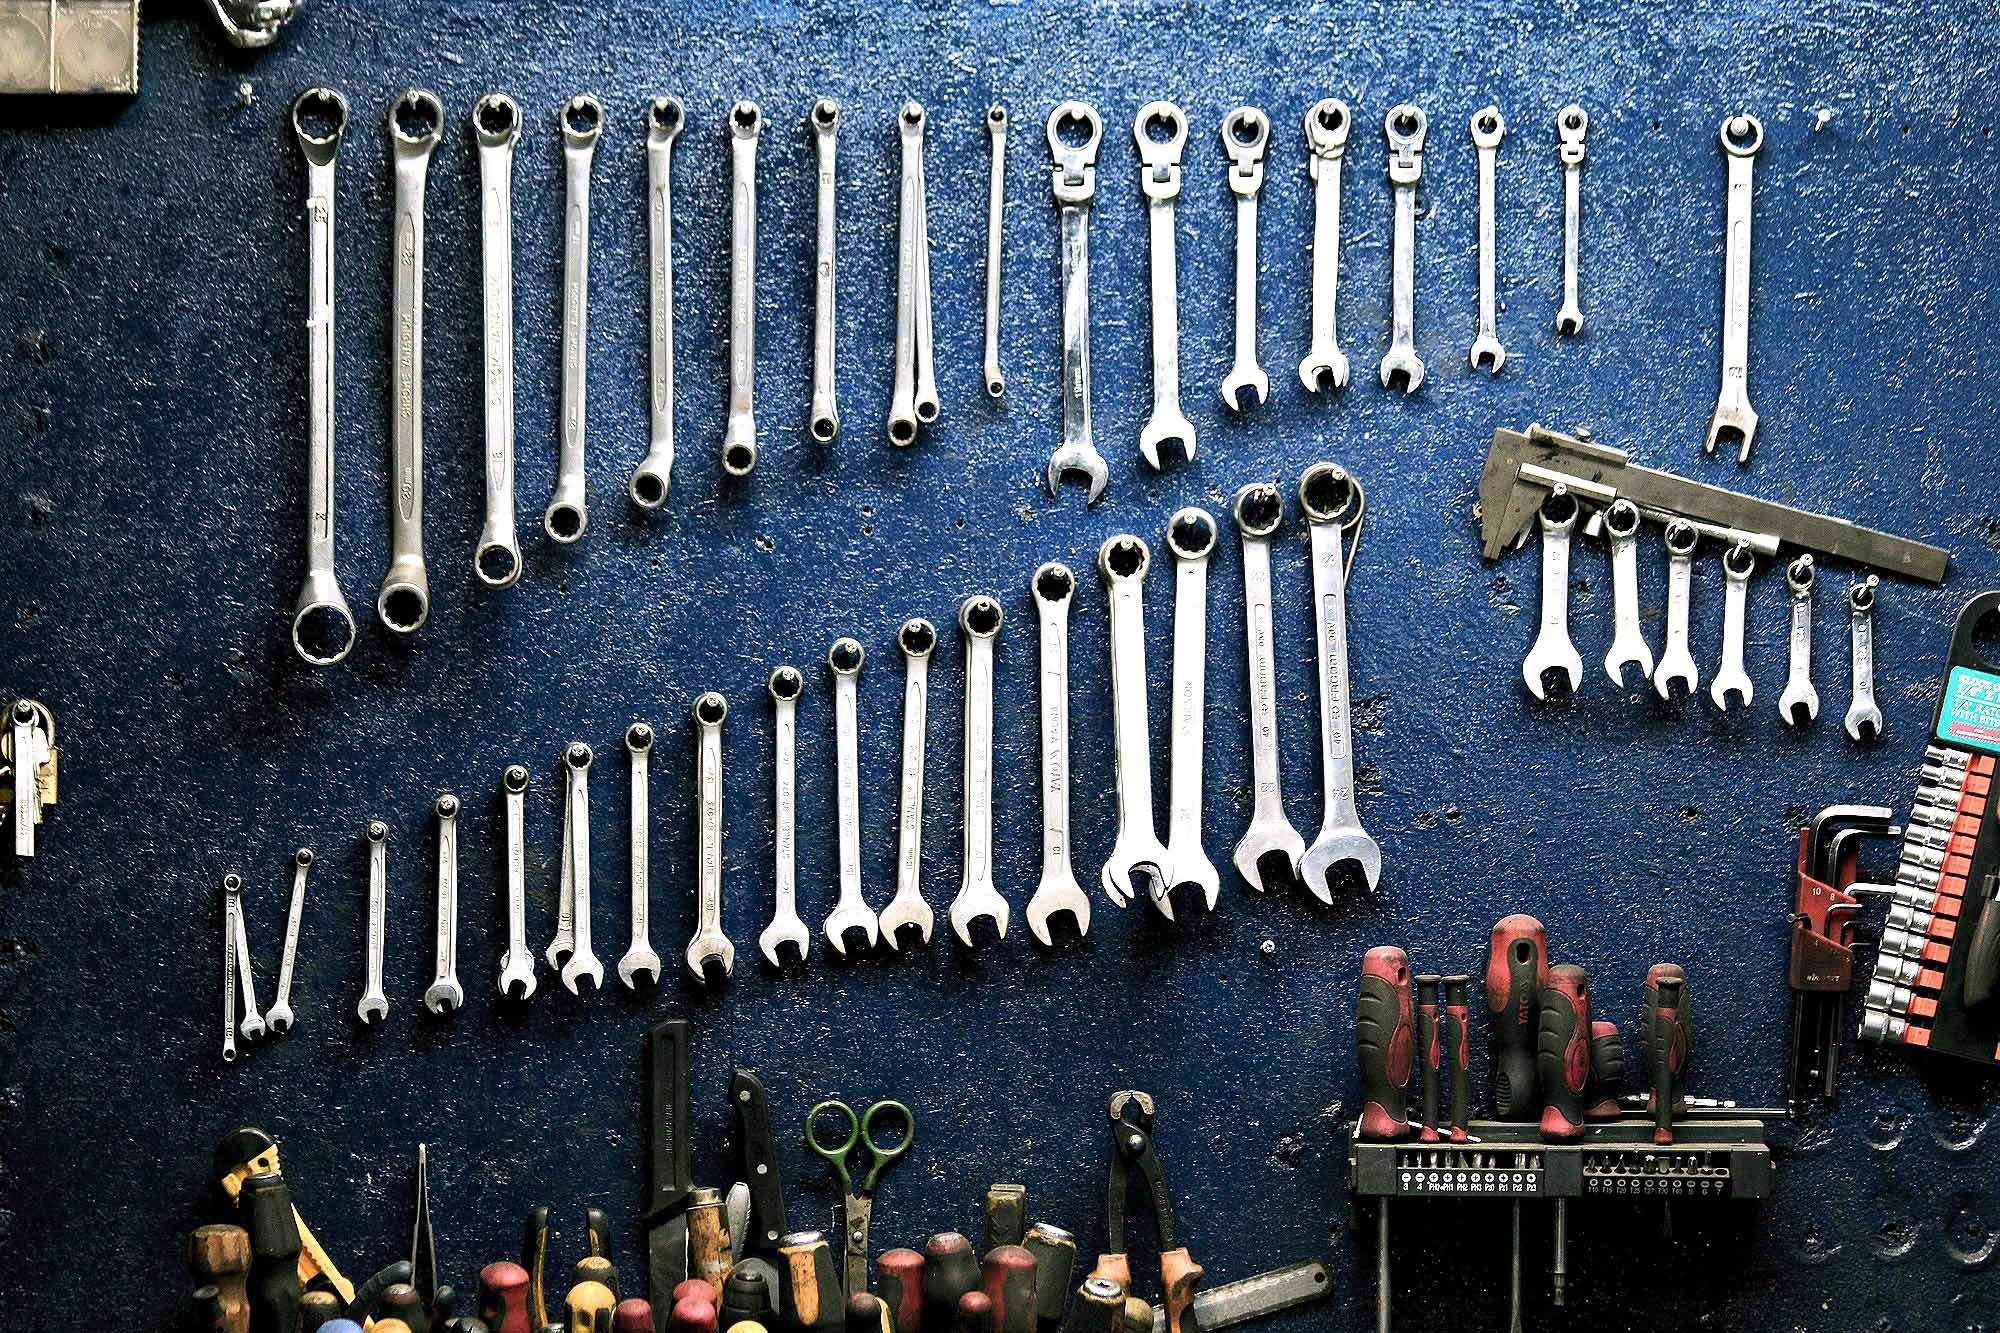 Wrenches, rulers, screwdrivers and other tools are arrayed on a pegboard